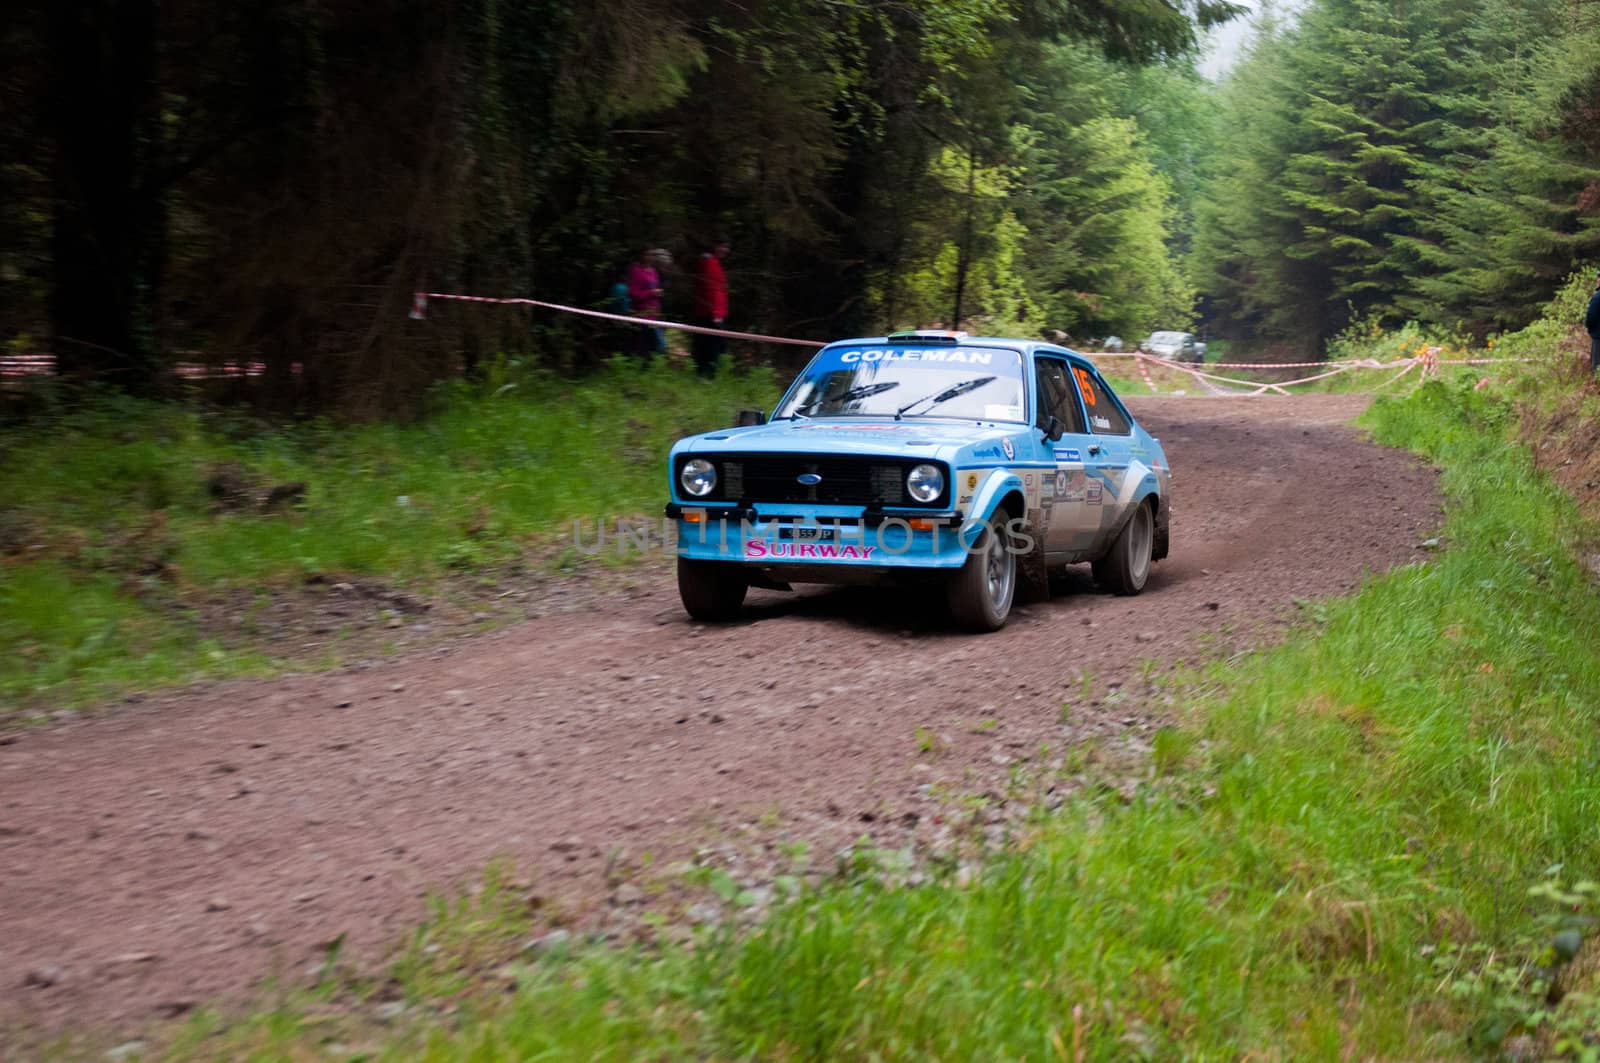 J. Coleman driving Ford Escort by luissantos84